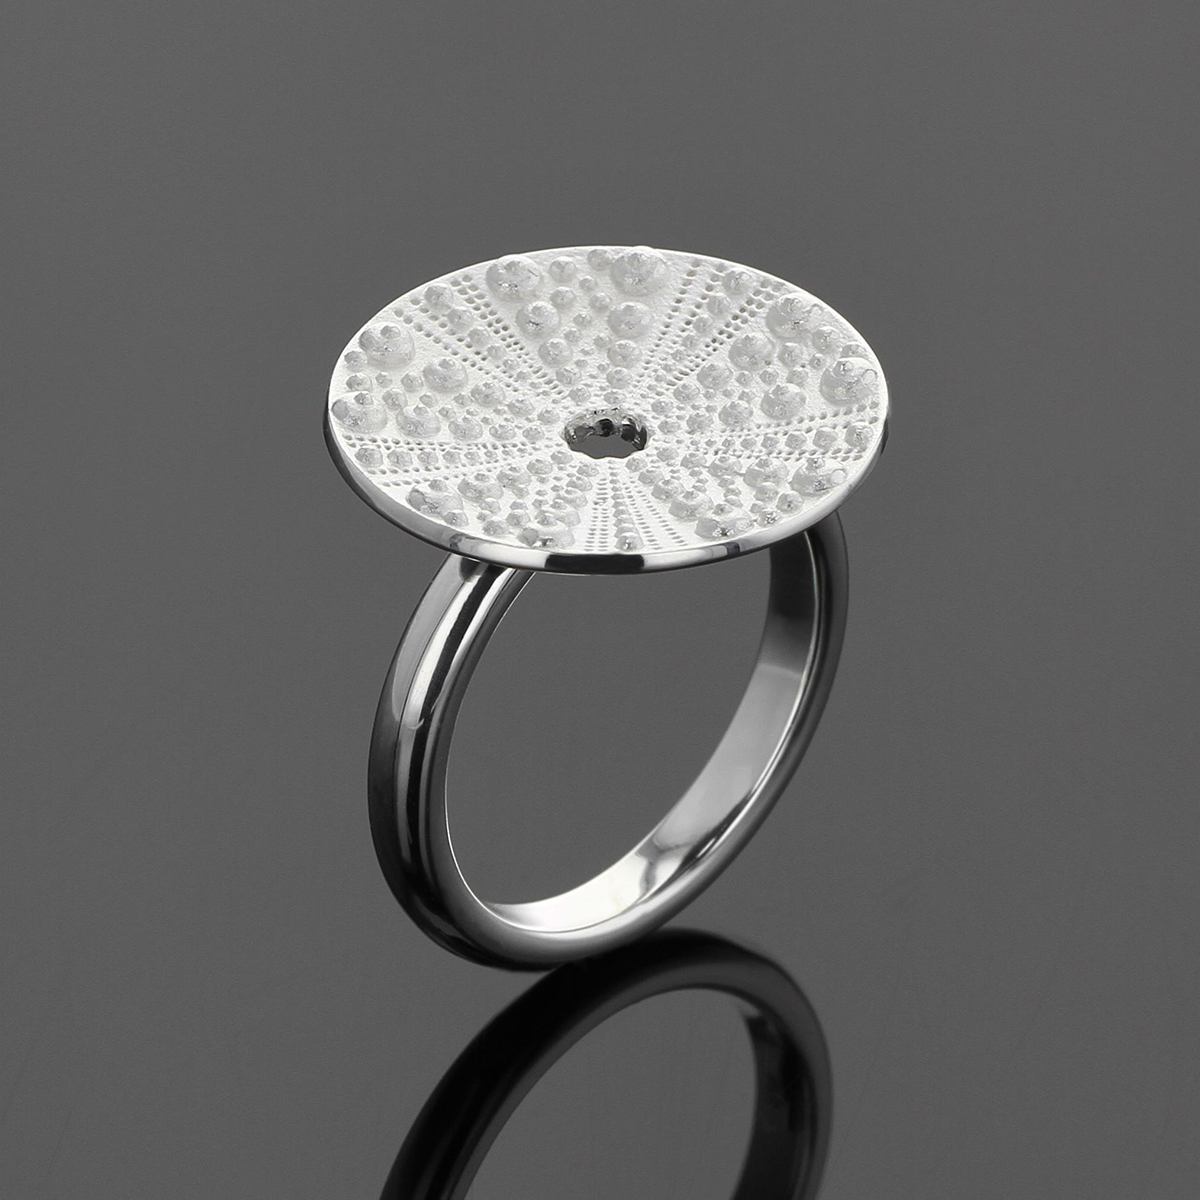 Silver ring with sea urchin texture.